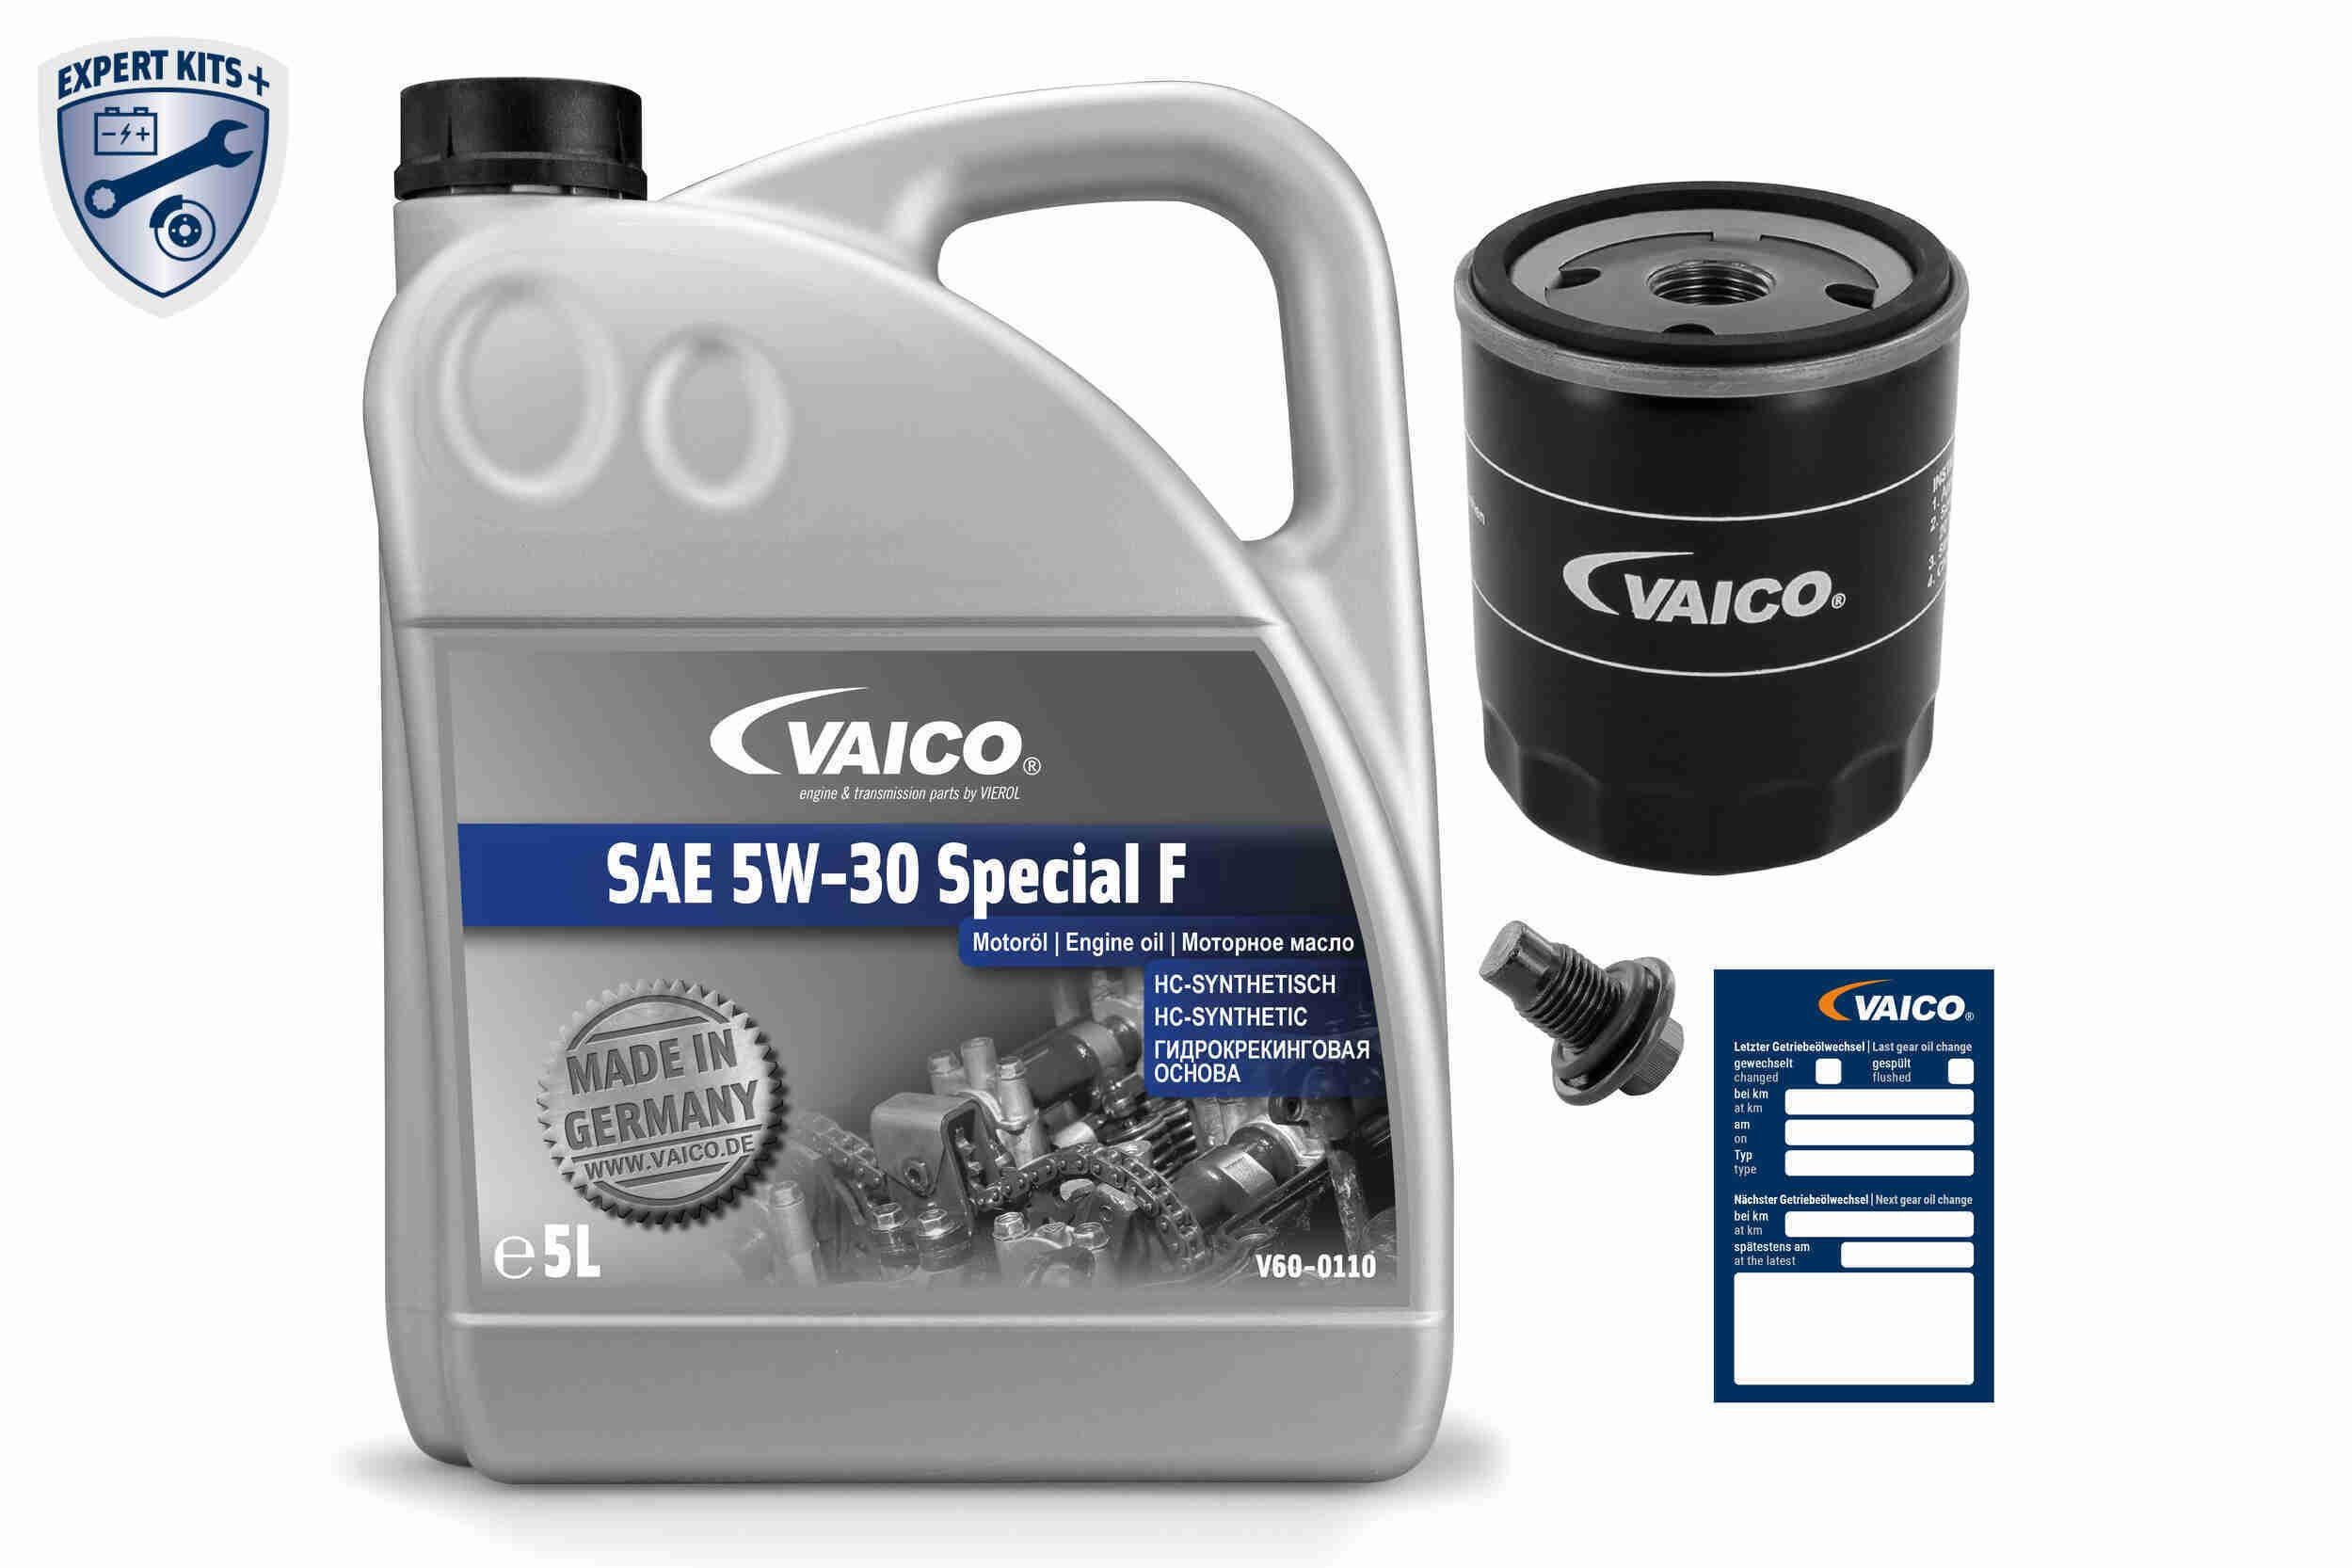 SAE 5W-30 Special F VAICO with oil drain plug, with oil, with filter, with seal ring Parts set, maintenance service V60-3003 buy